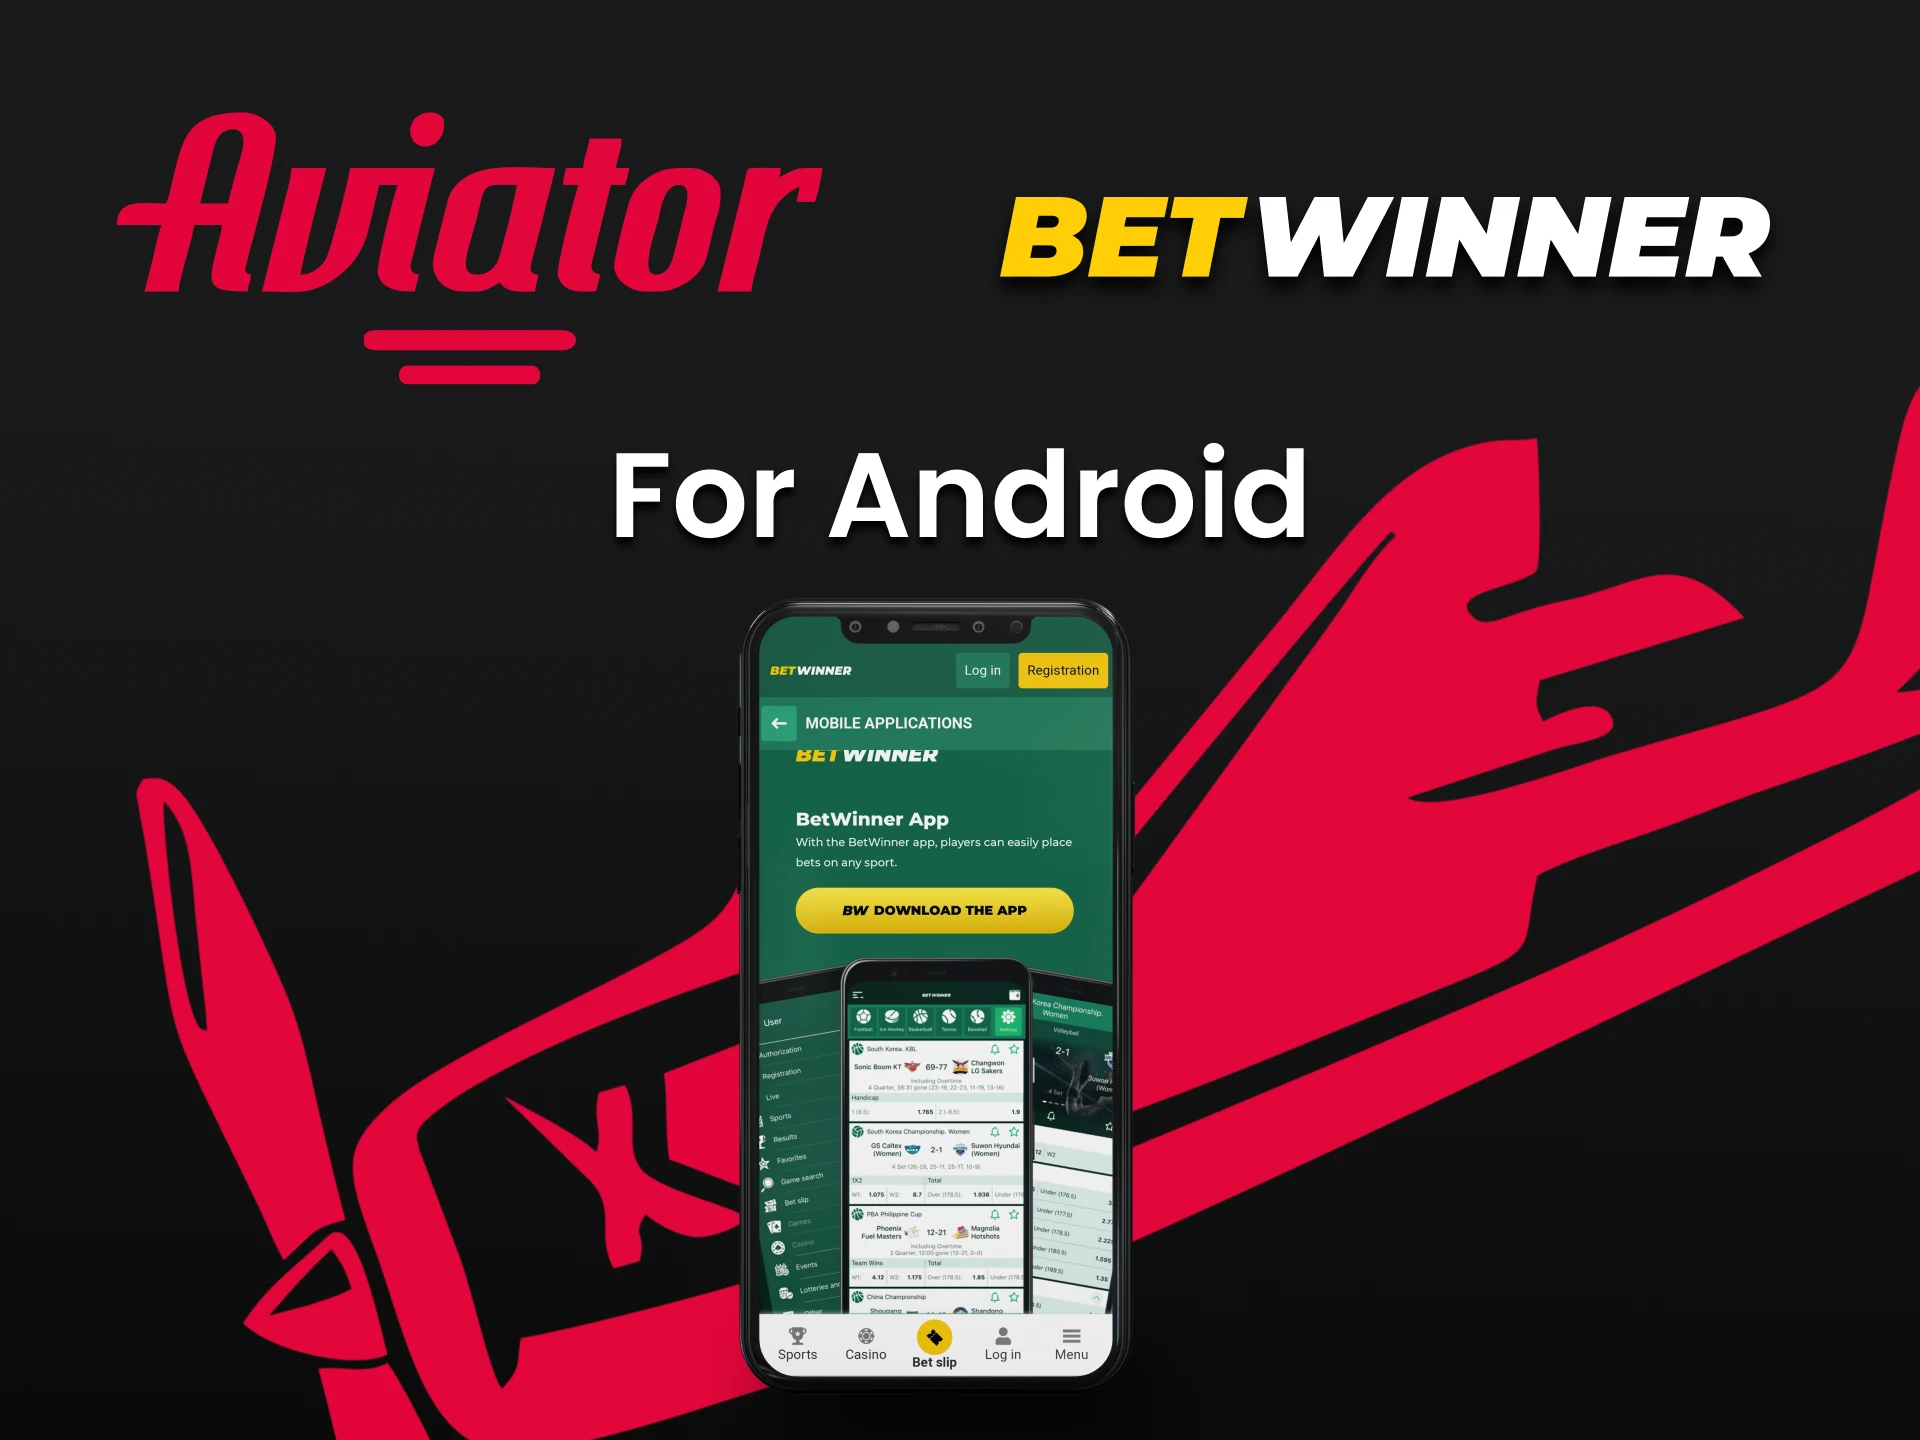 Download the Betwinner app to play Aviator on Android.